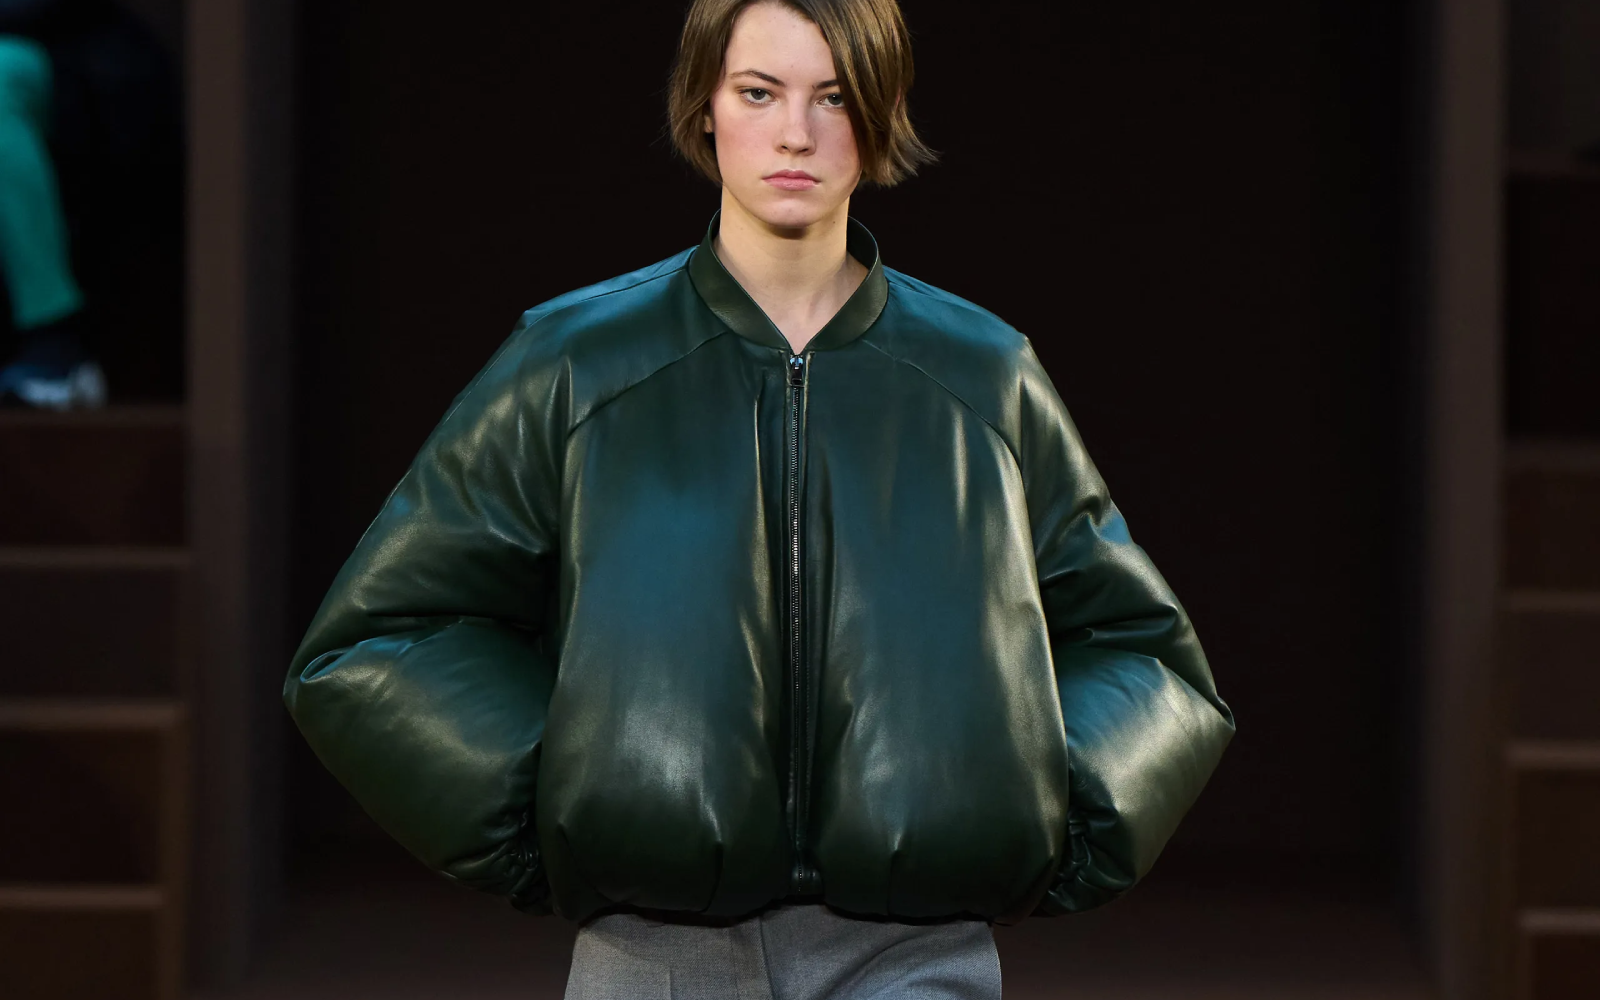 No, Loewe's bomber jacket is not a plagiarism of Yeezy Gap's Round